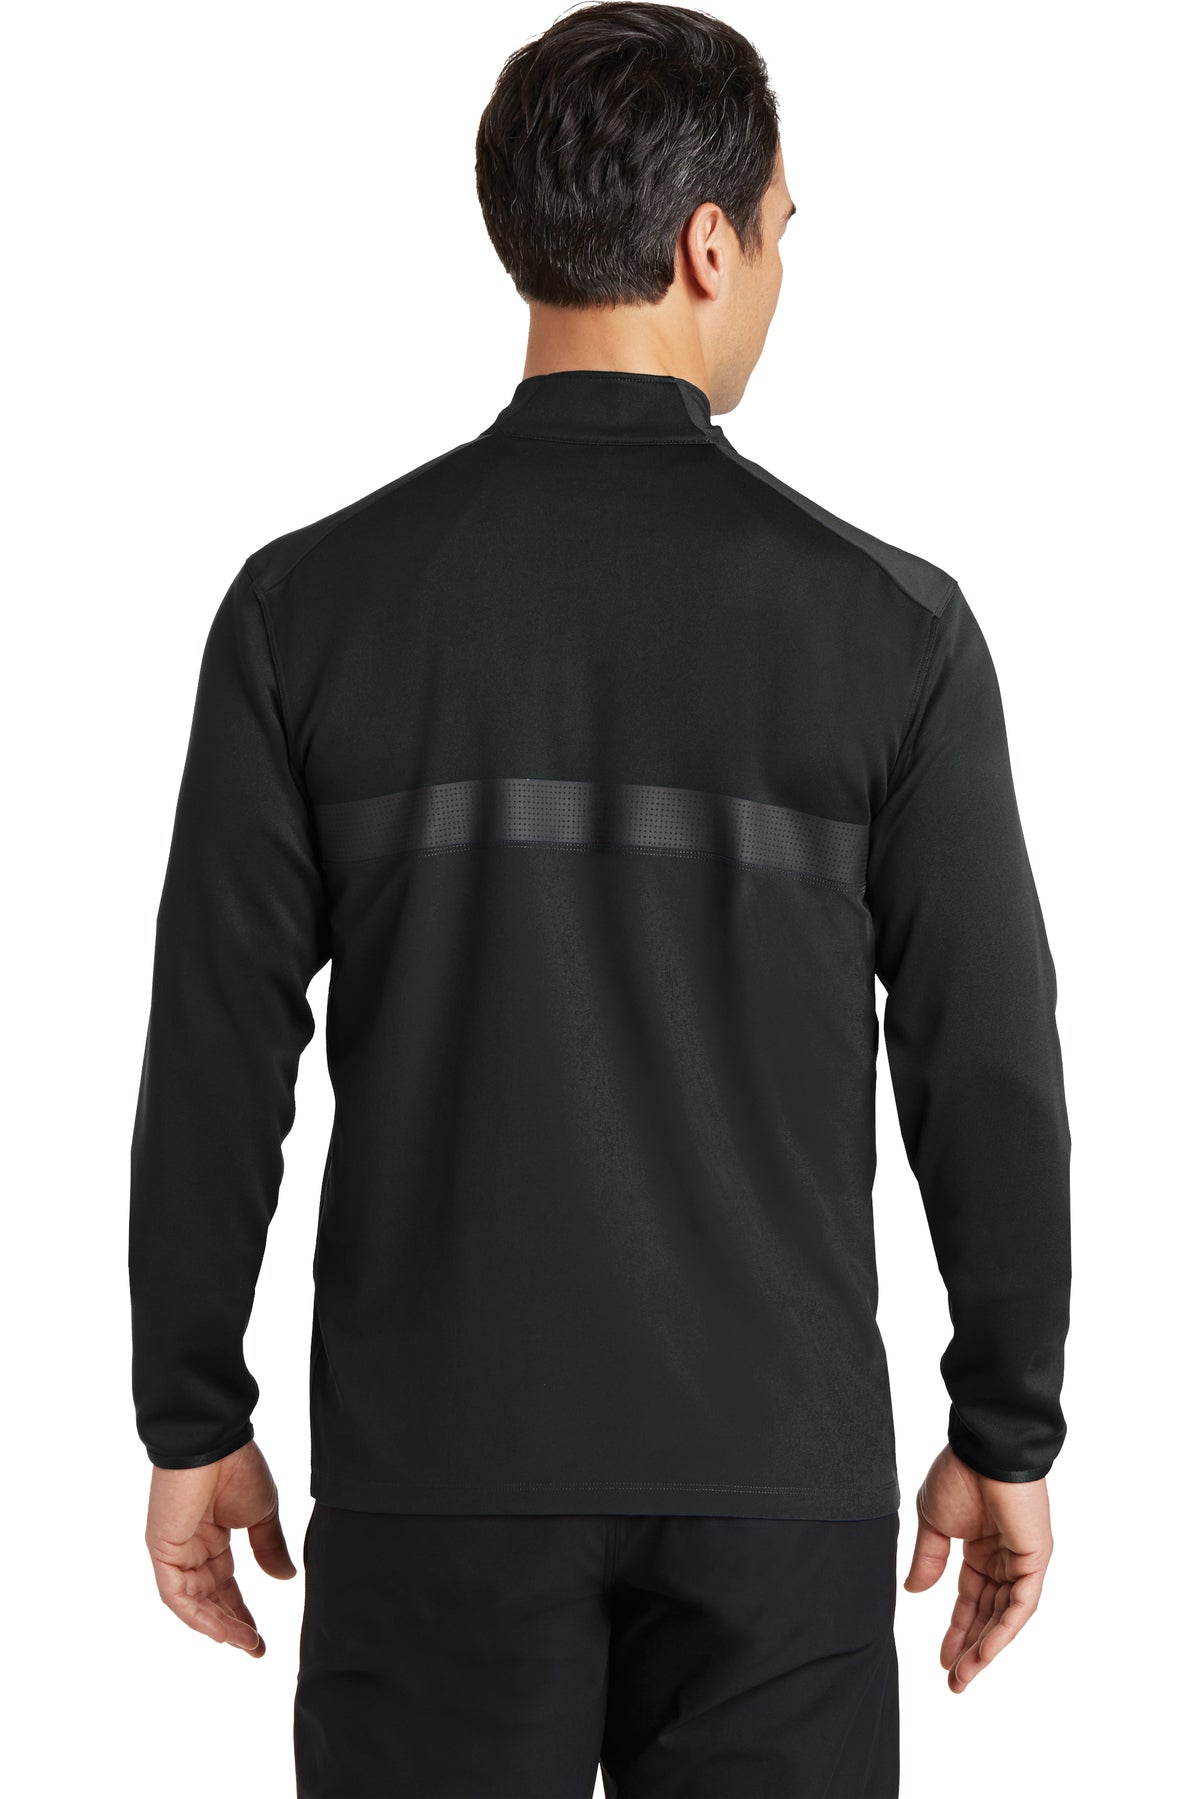 Nike Dri-FIT Fabric Mix 1/2-Zip Cover-Up-10